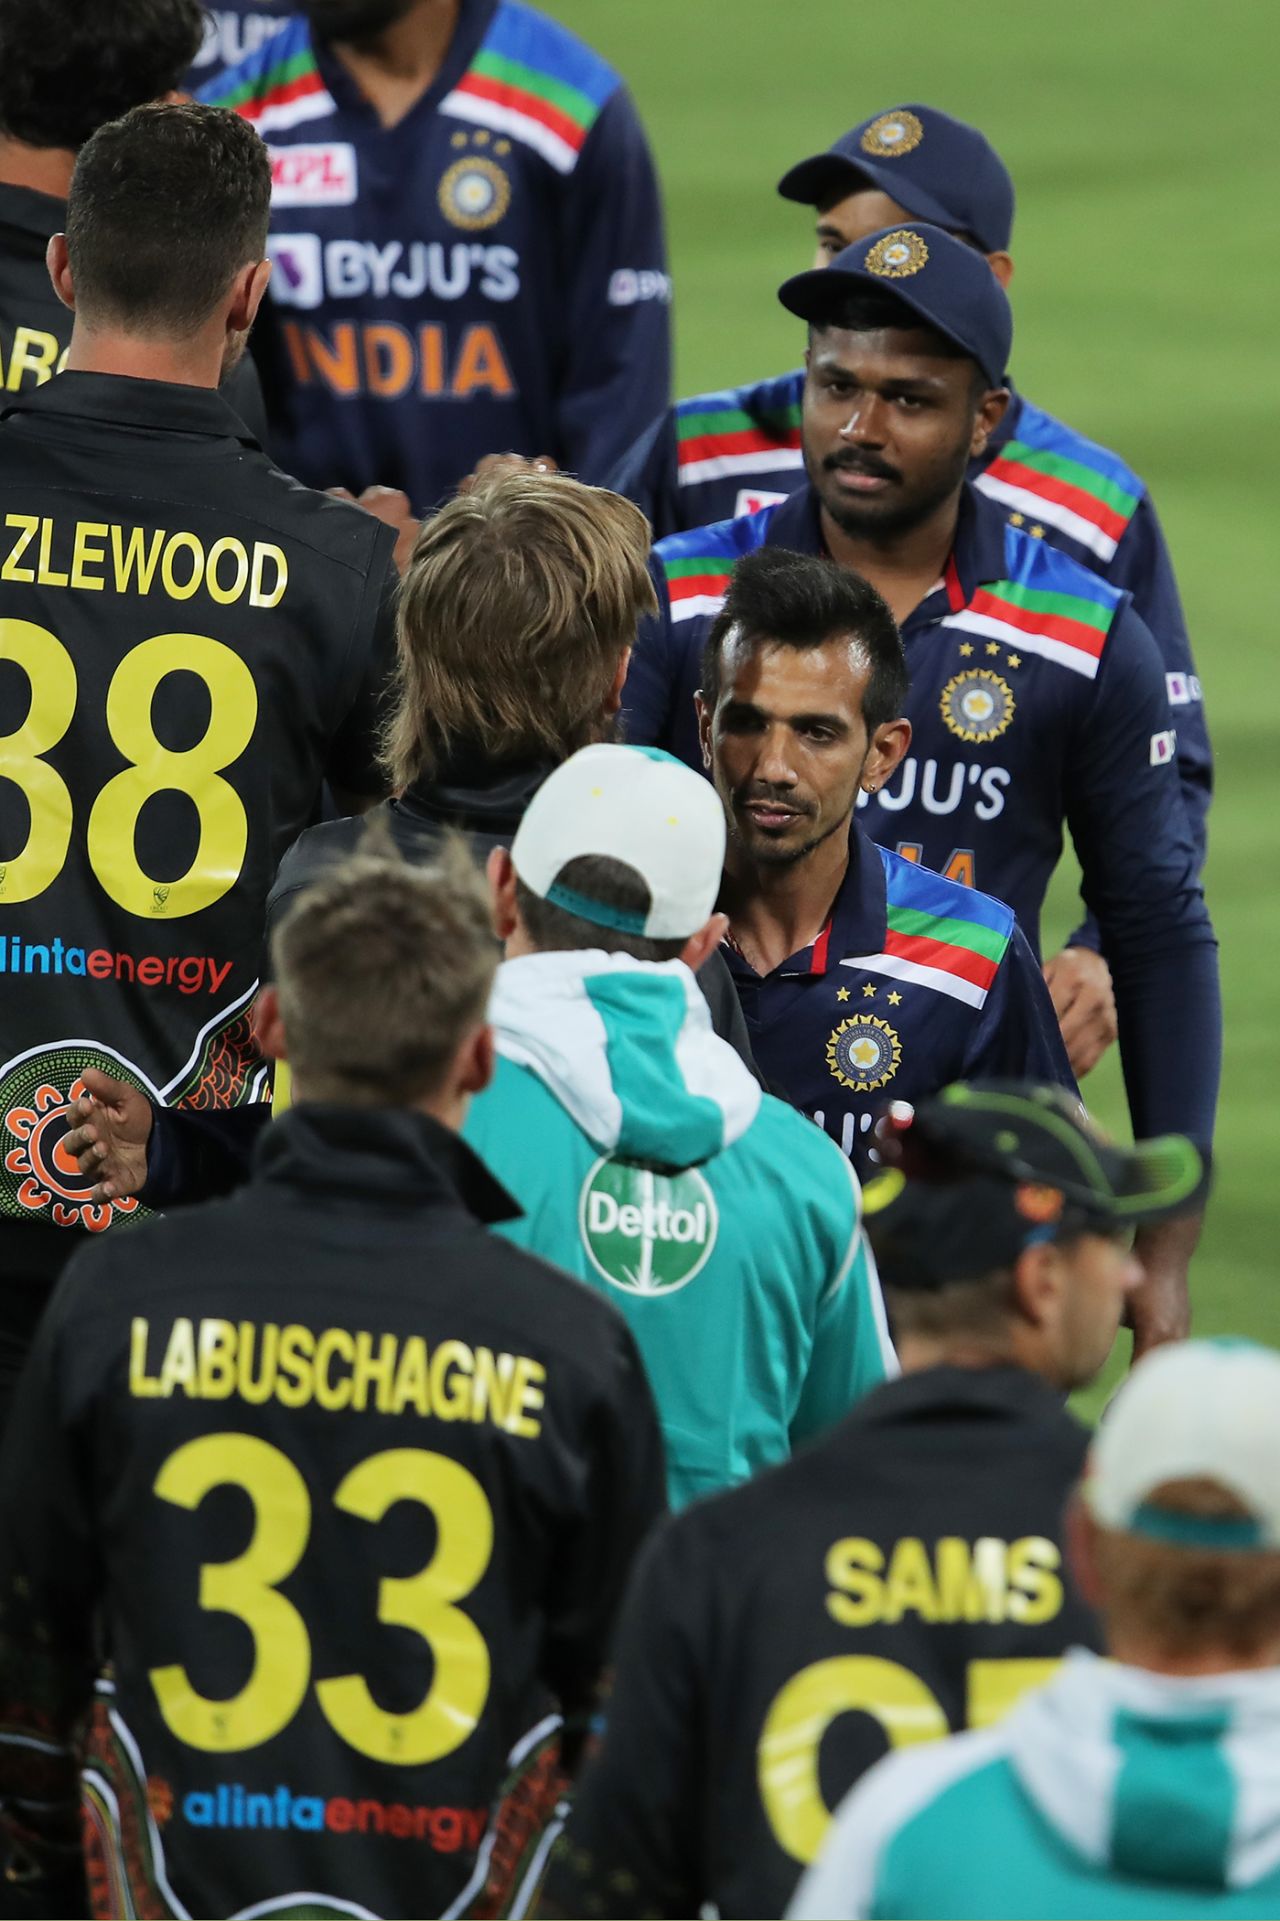 The teams greet each other after India clinched victory, Australia vs India, 1st T20I, Canberra, December 4, 2020